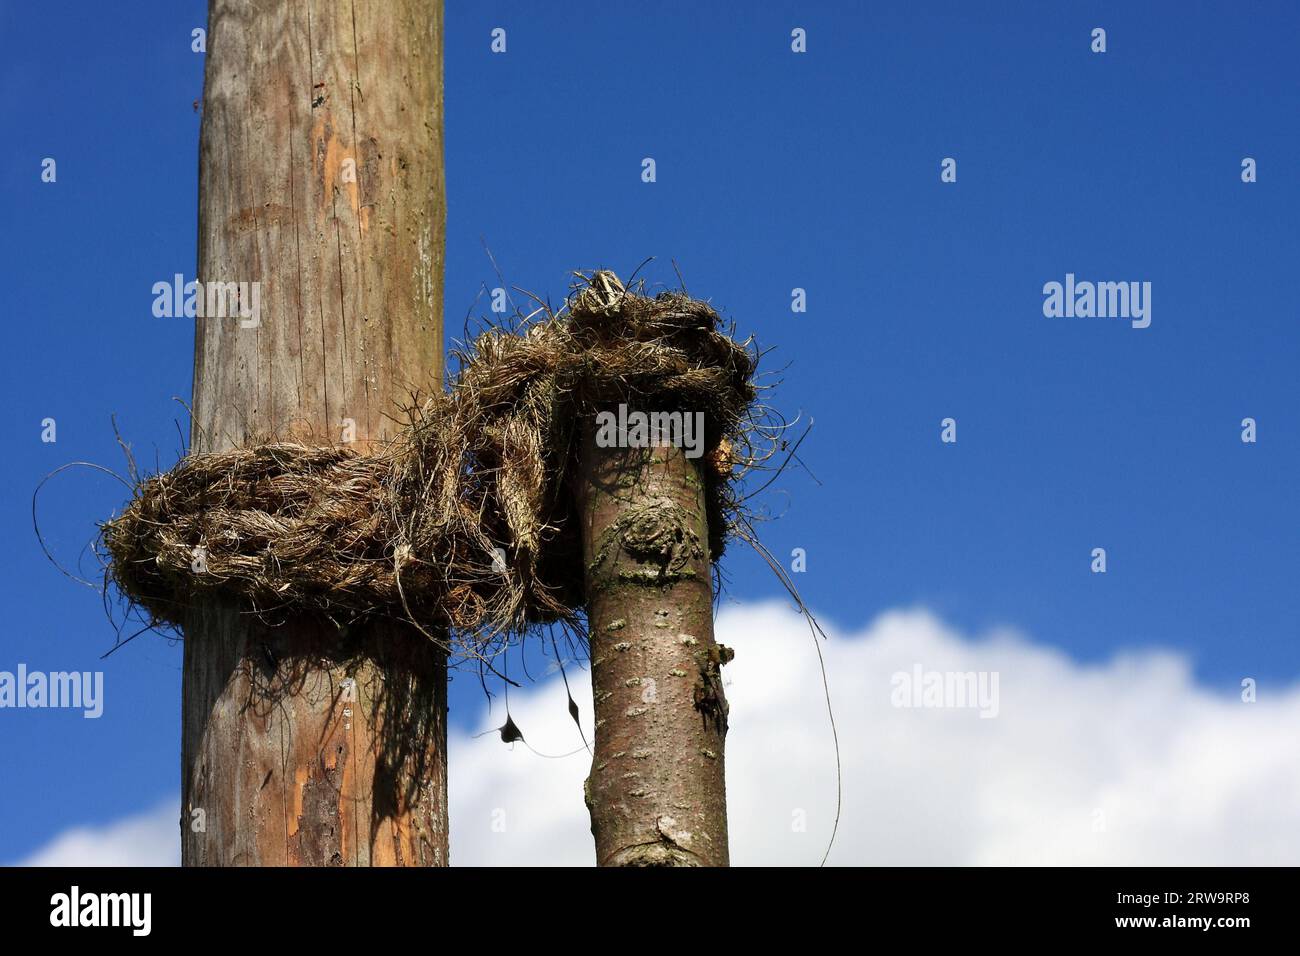 Tree trunks connected by a hemp rope, background blue-white sky Stock Photo